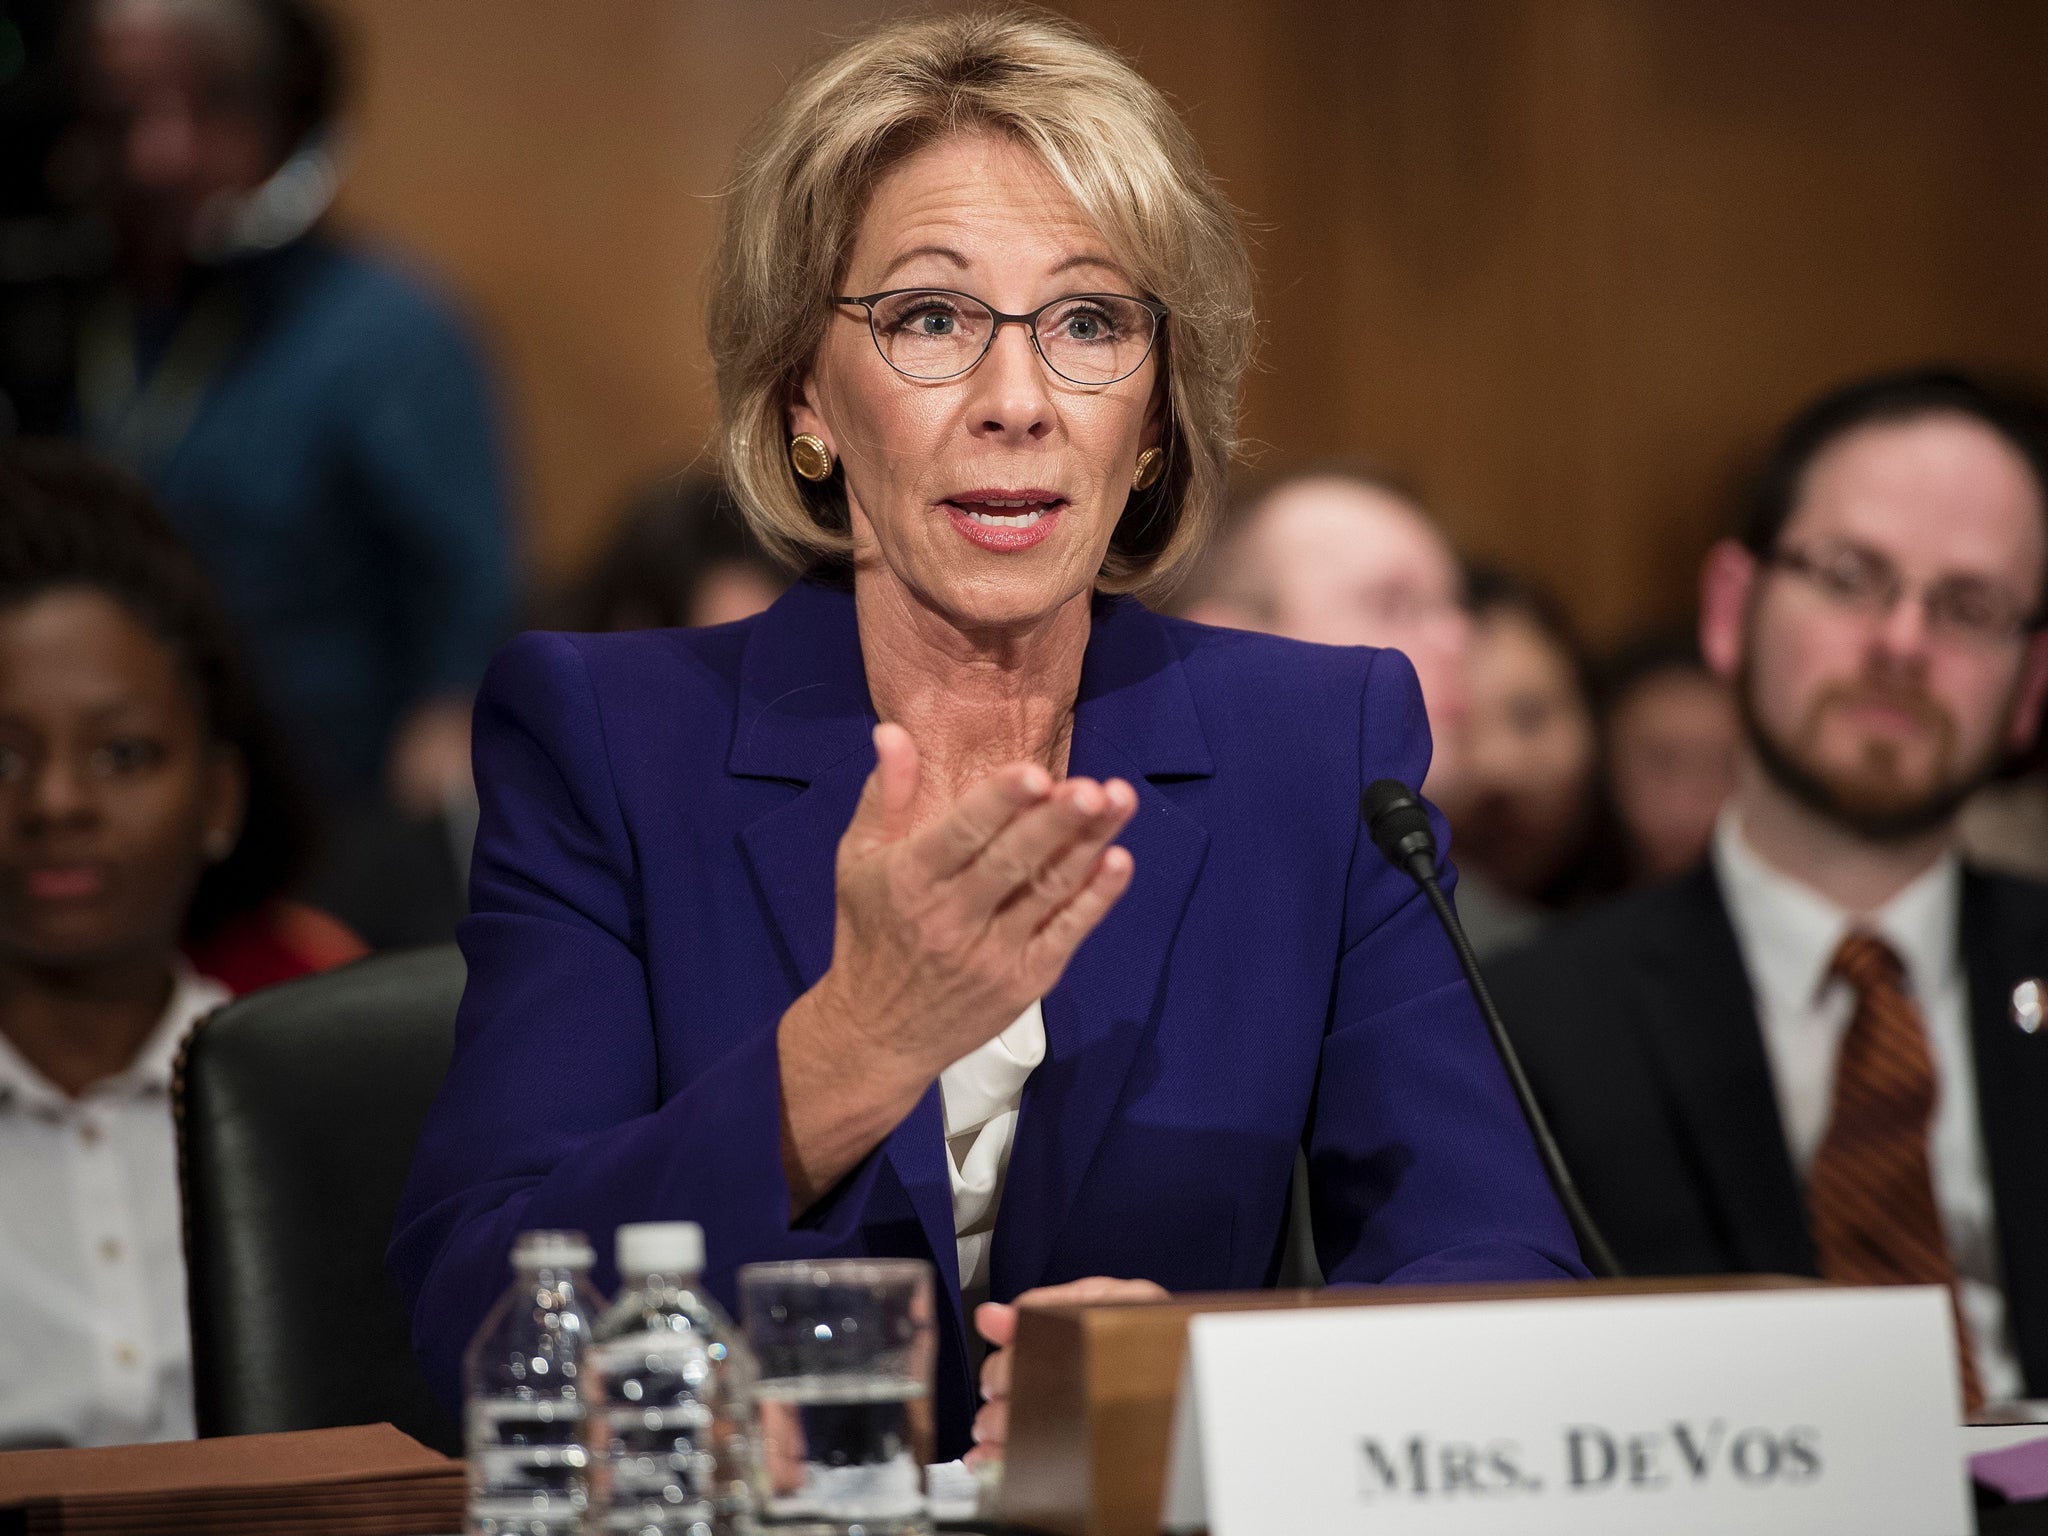 DeVos speaks during her confirmation hearing before the Senate Health, Education, Labour, and Pensions Committee